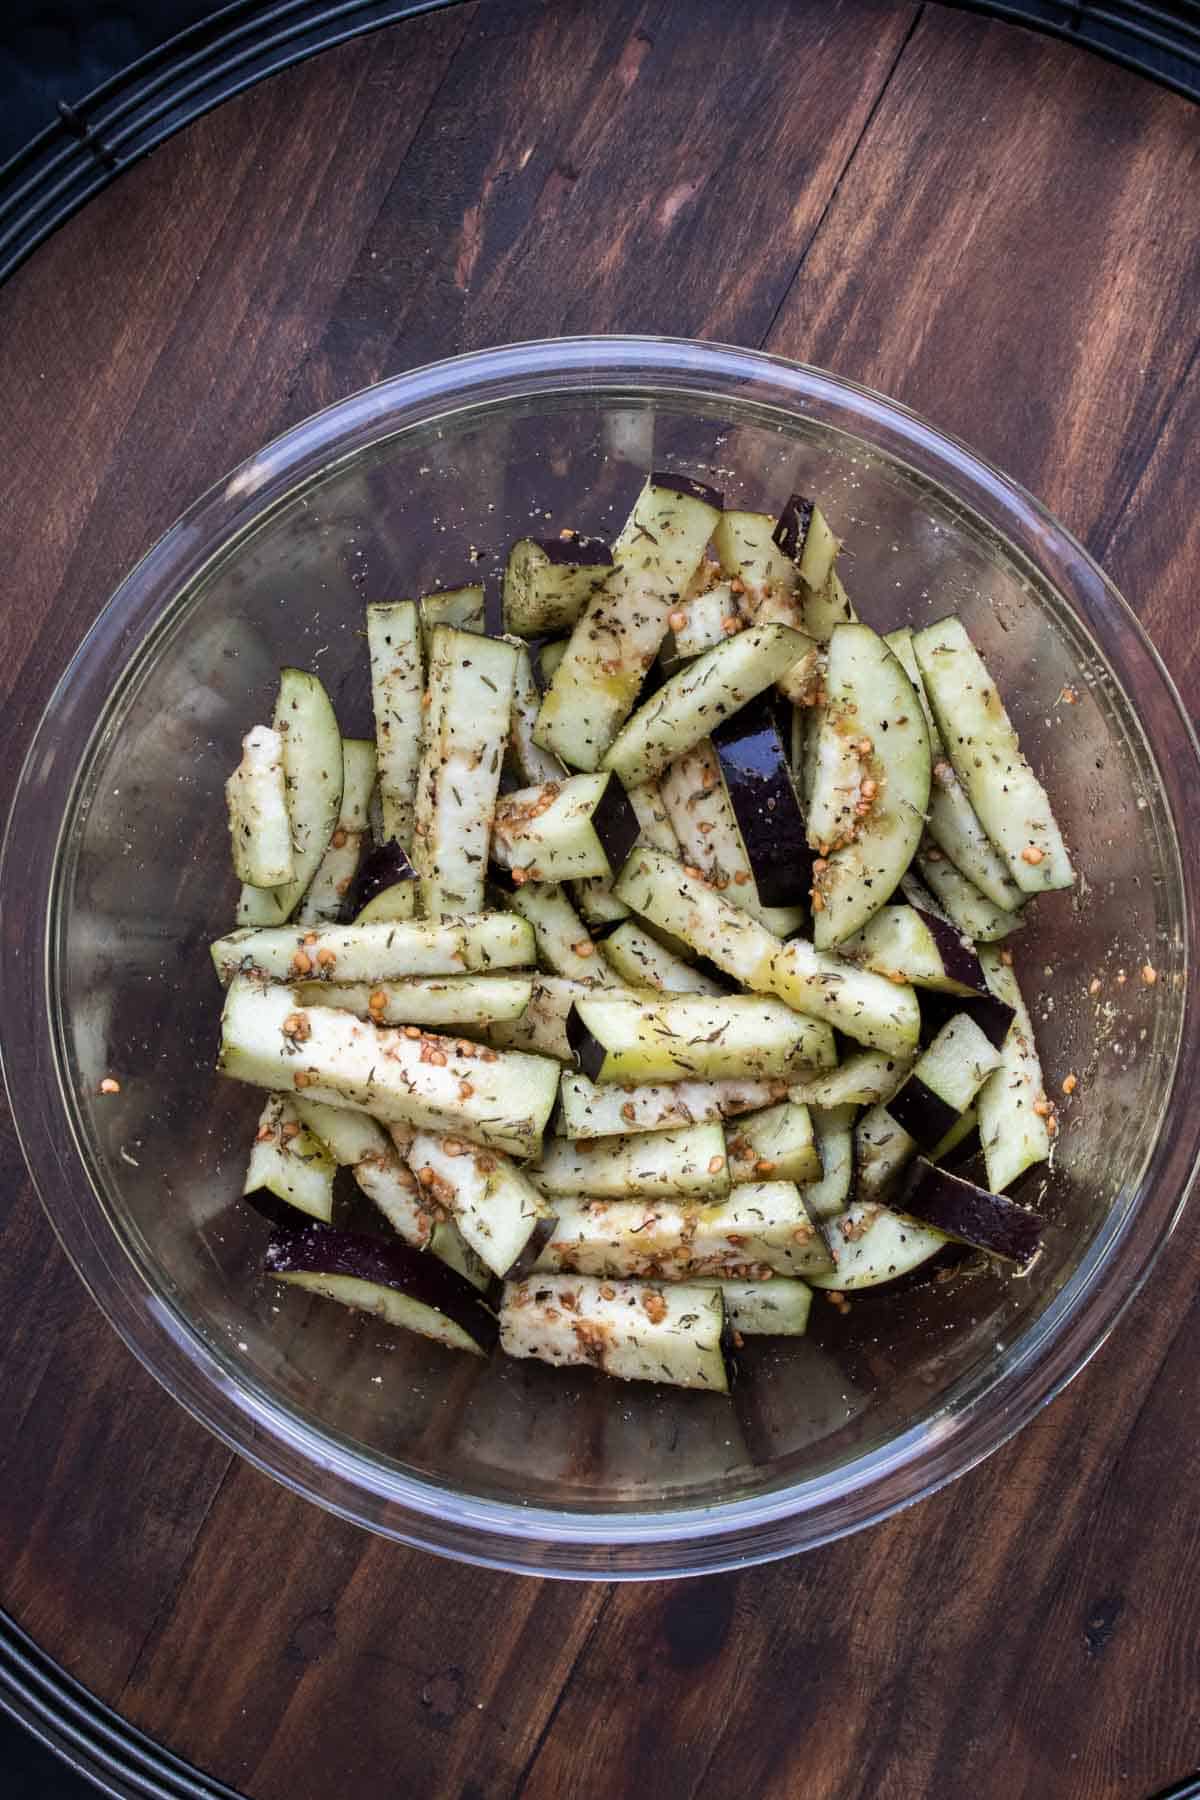 Glass bowl with fry shaped eggplant pieces covered in spices